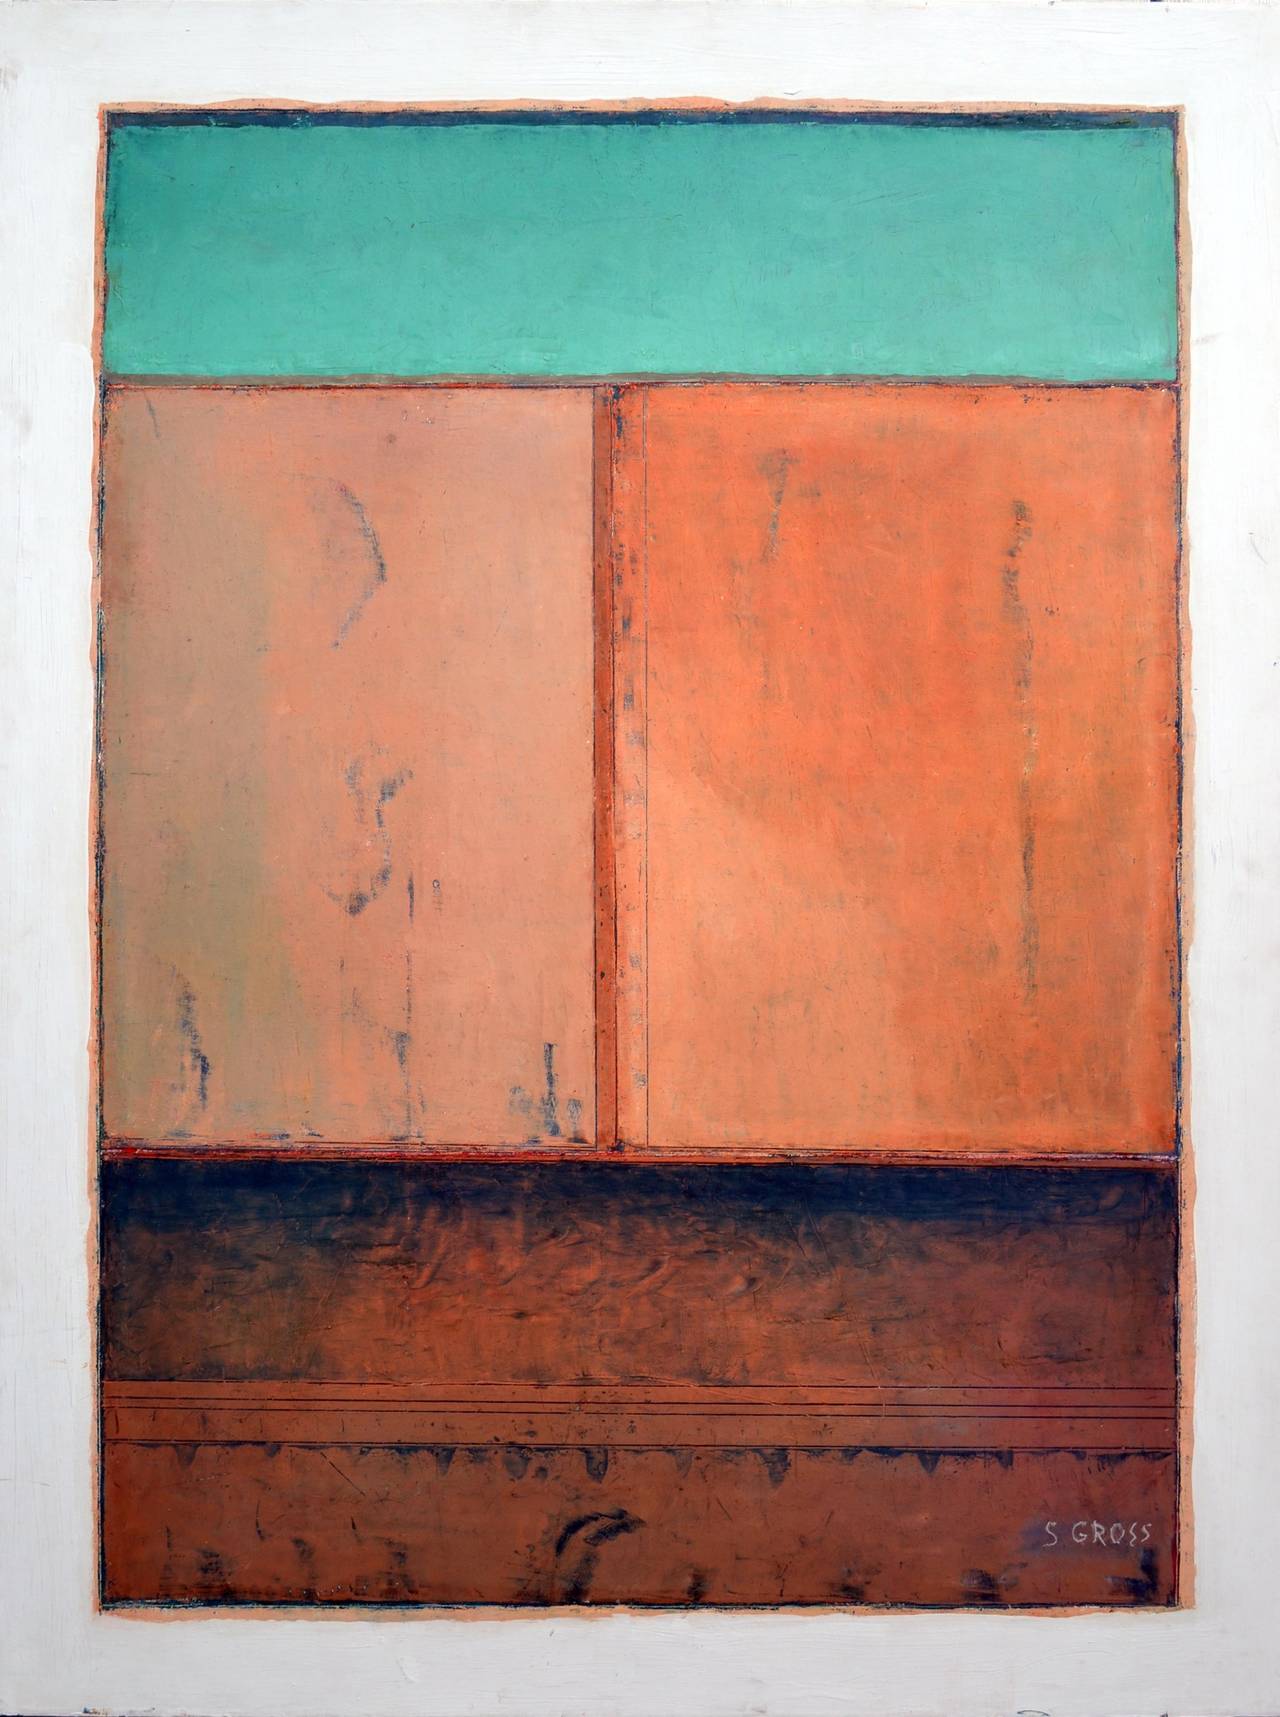 Stewart B. Gross Abstract Painting - Green and Orange Composition